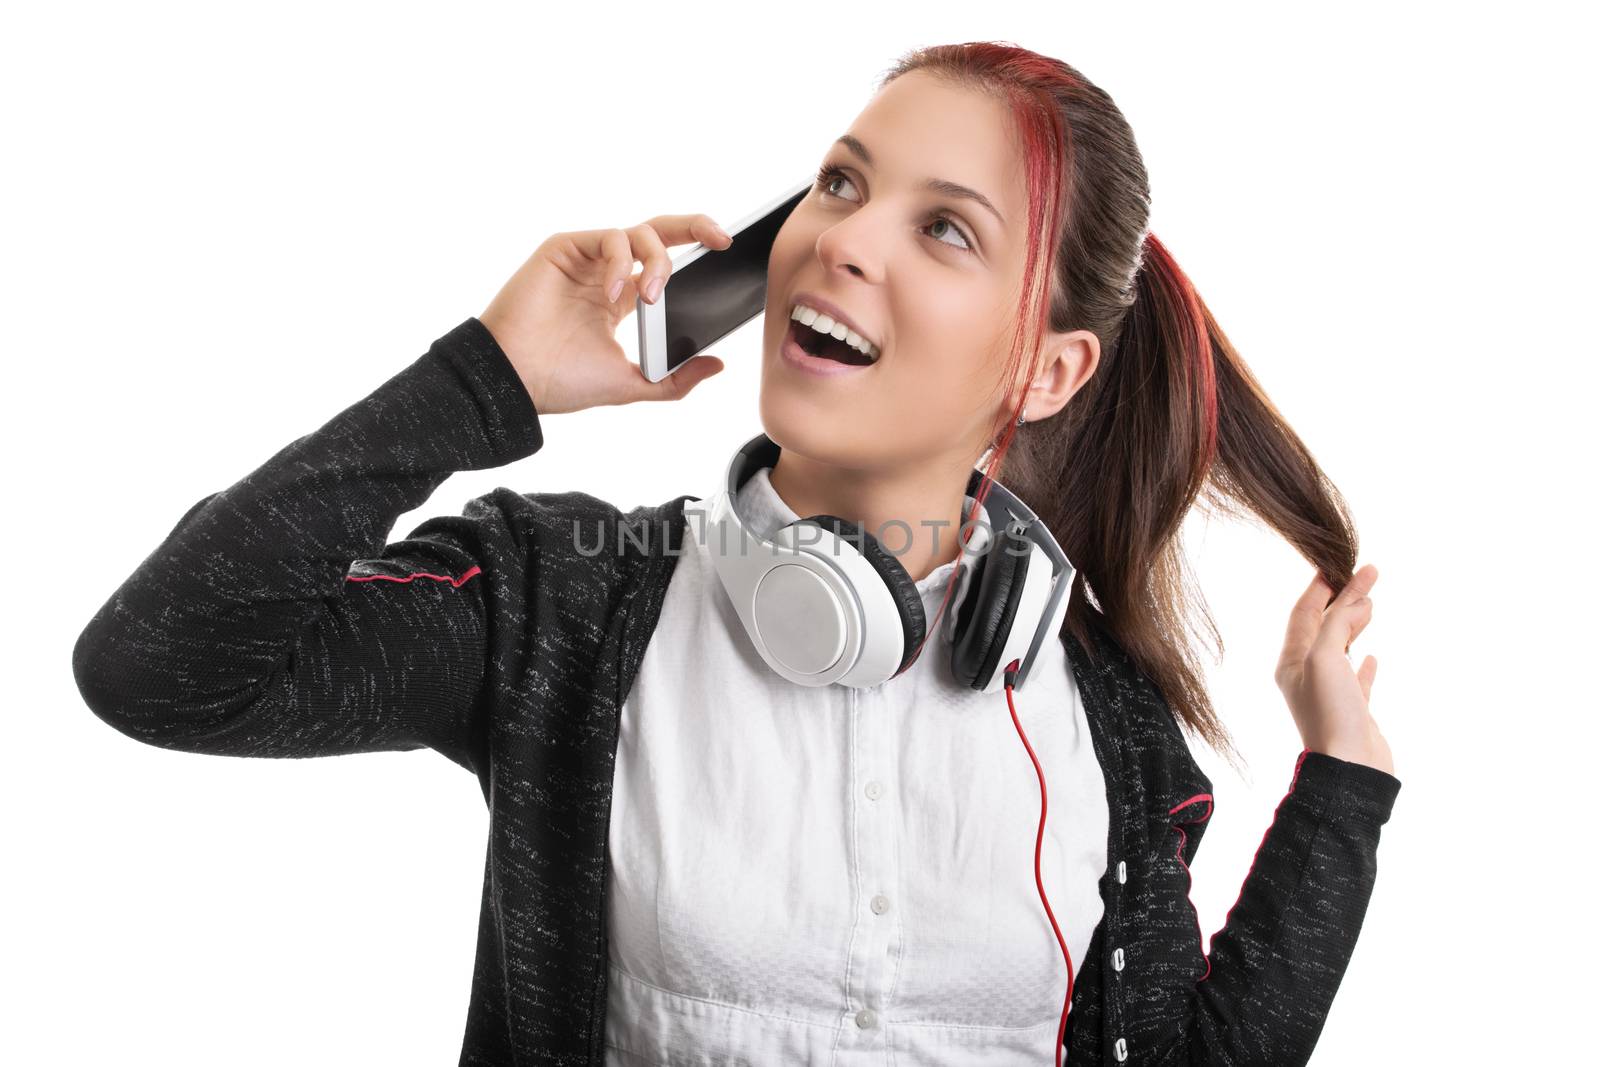 Close up shot of a beautiful smiling young girl in uniform with headphones around her neck, talking on the phone and playing with her hair, isolated on white background.